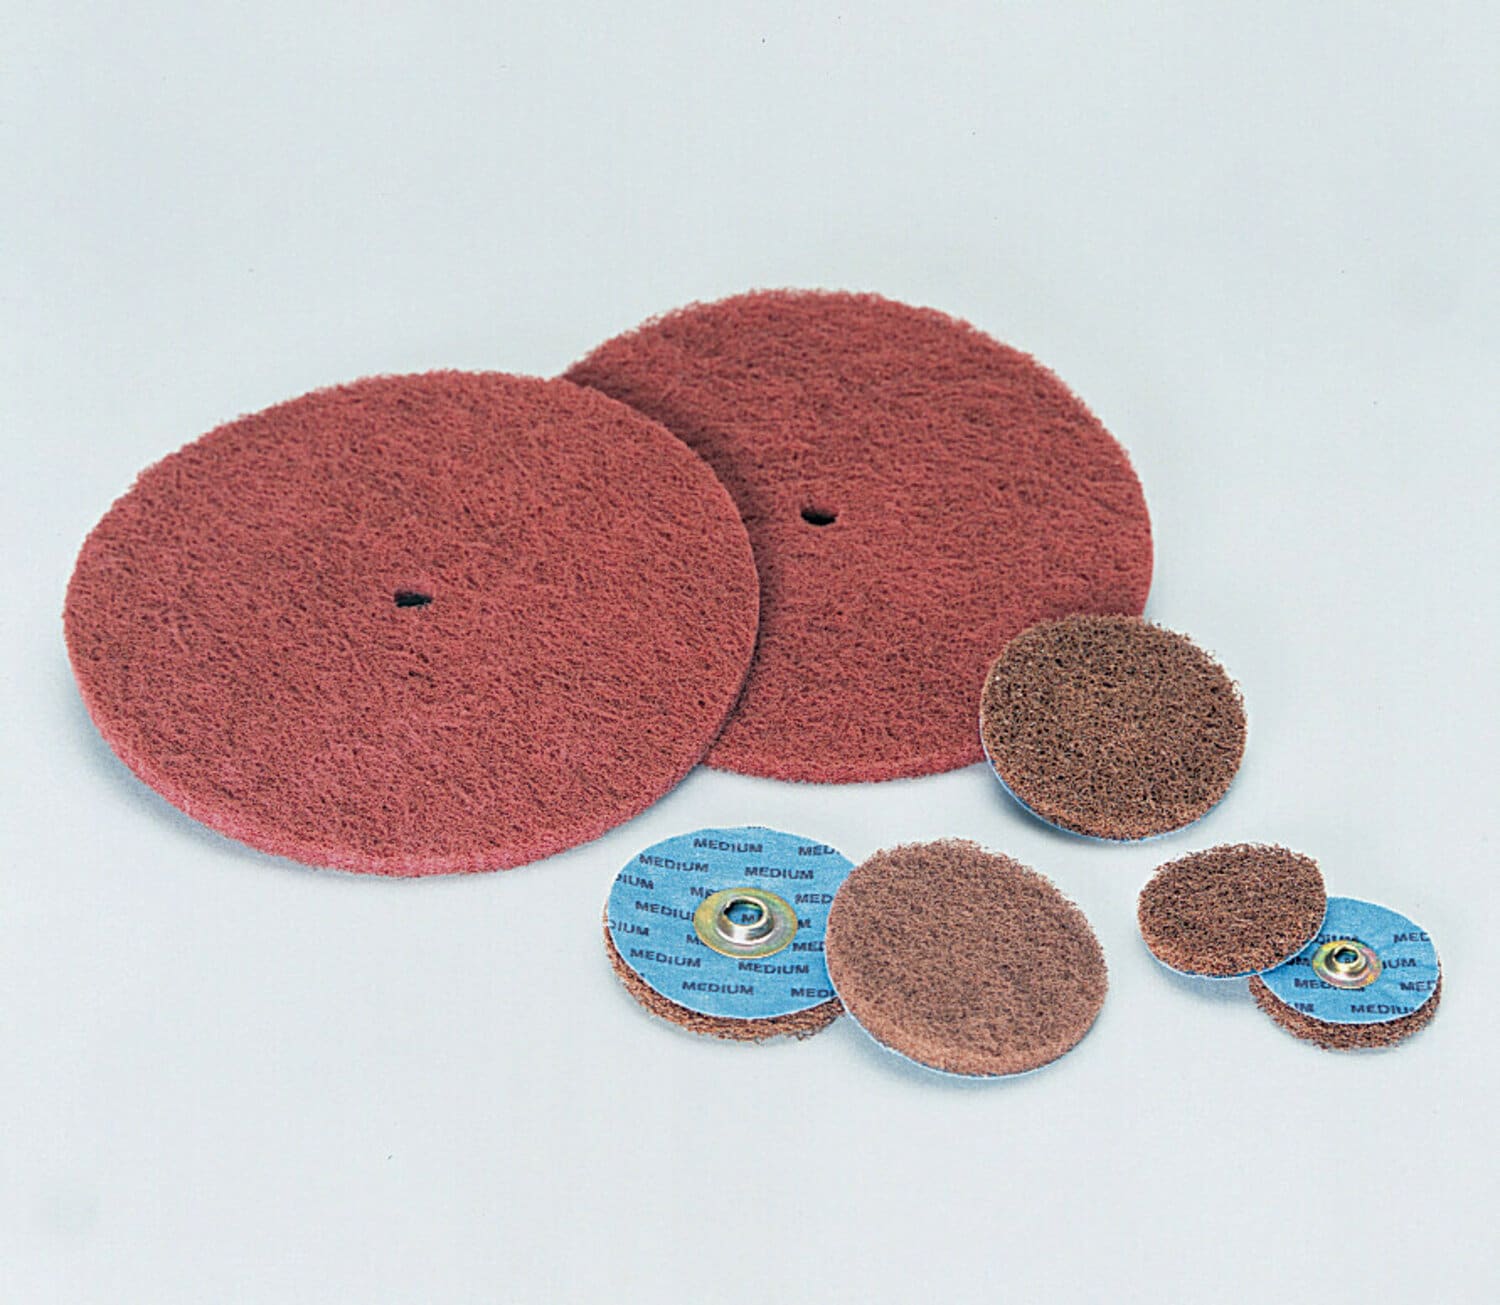 7010368550 - Standard Abrasives Buff and Blend GP Disc, 840810, 7 in x 1/2 in A MED,
10/Pac, 100 ea/Case